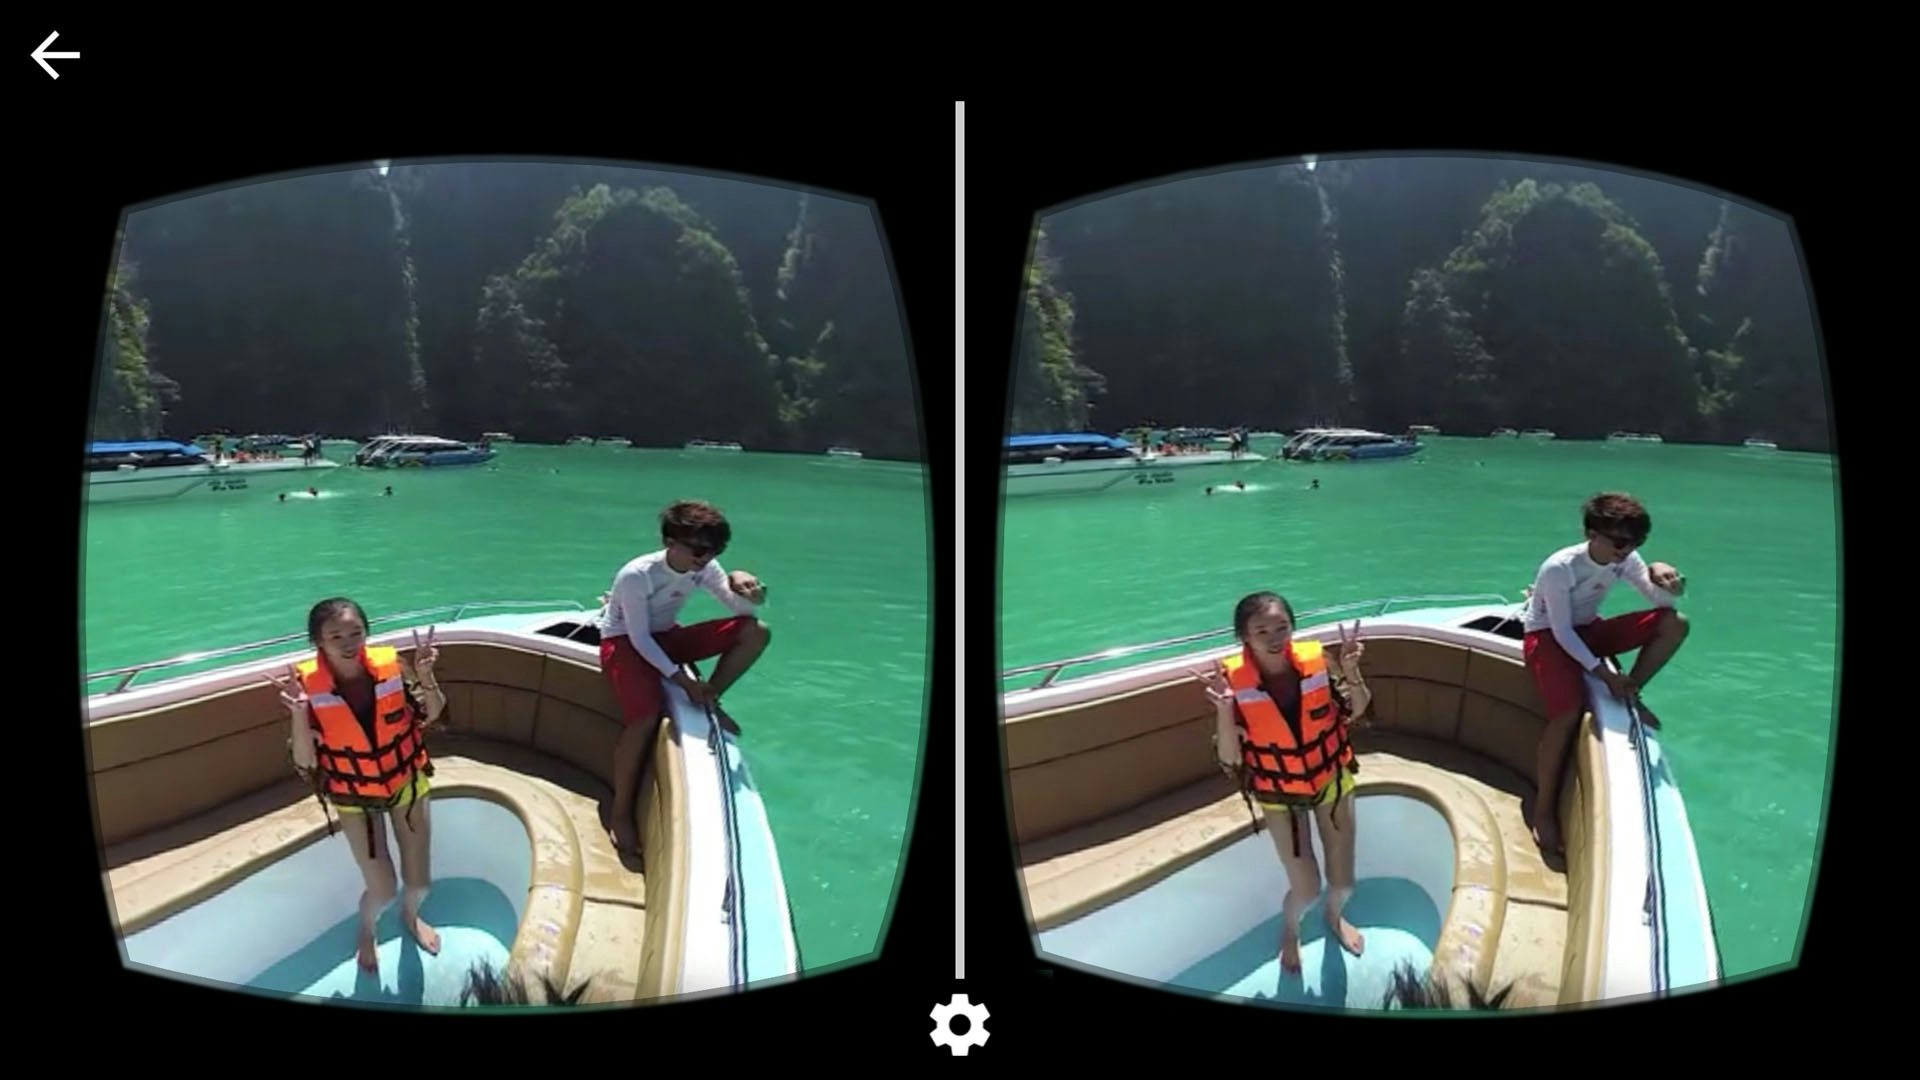 VR content is an increasingly important tool for destination marketing organizations in China.